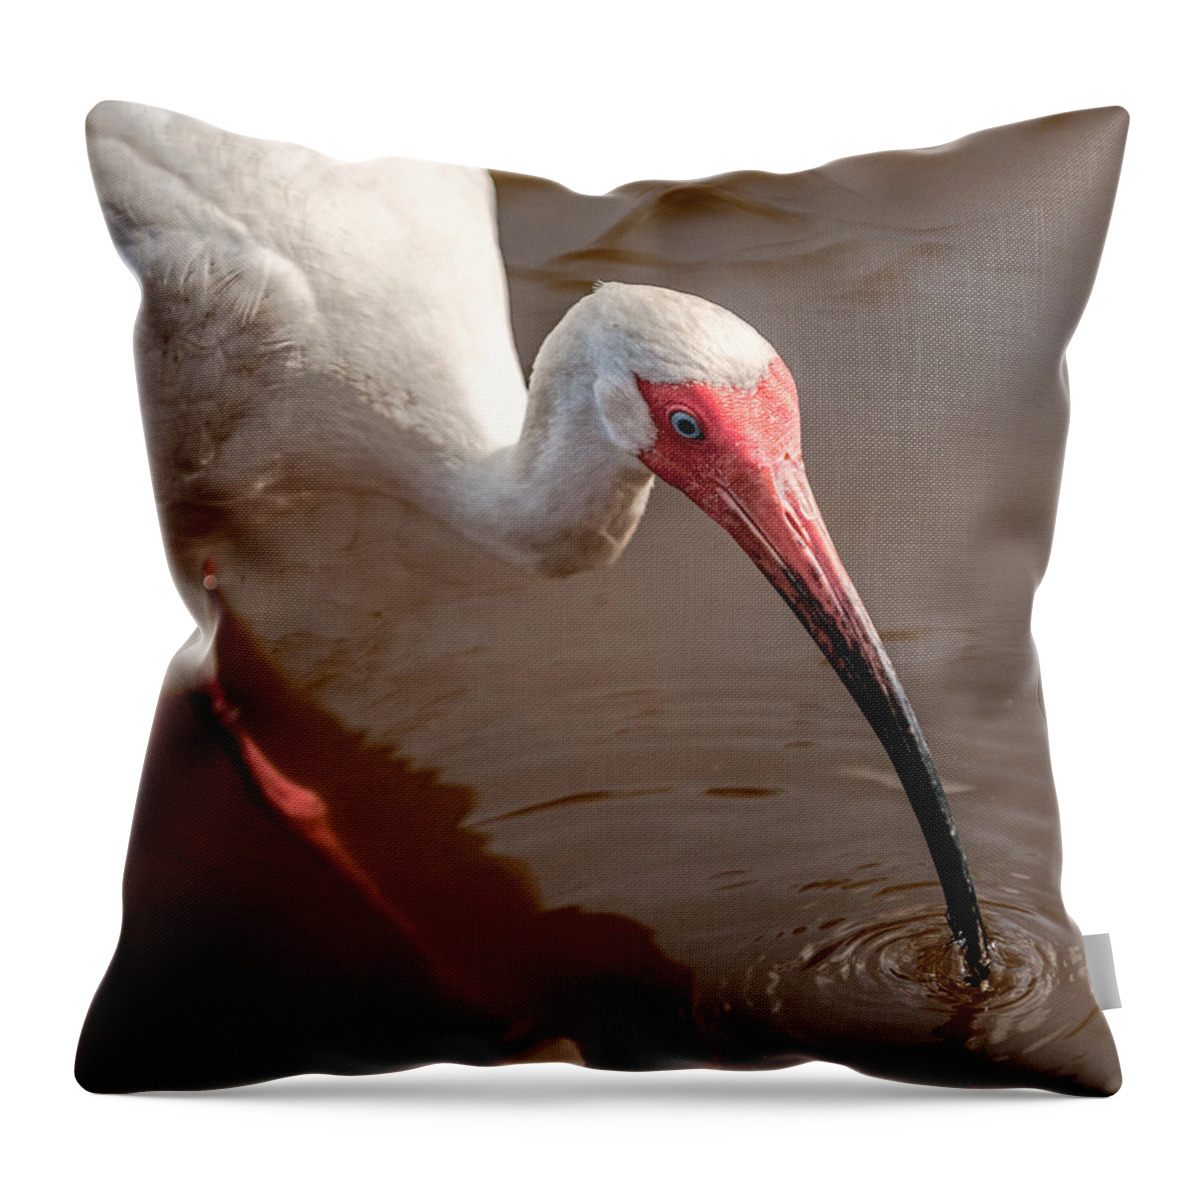 Ibis Throw Pillow featuring the photograph White Ibis by Christopher Holmes